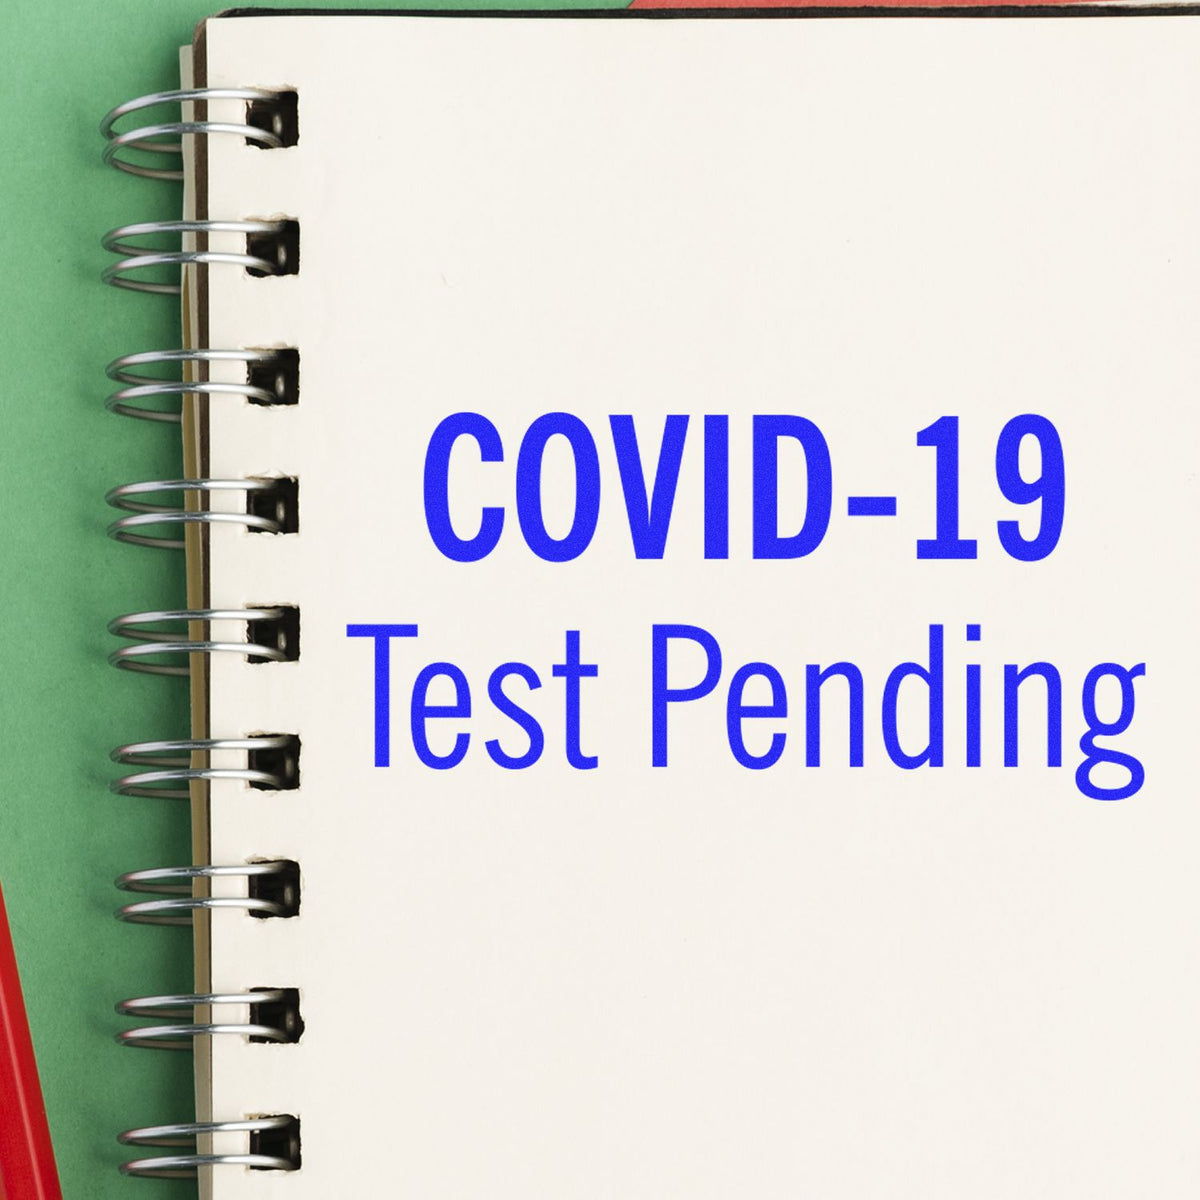 Slim Pre-Inked Covid-19 Test Pending Stamp In Use Photo